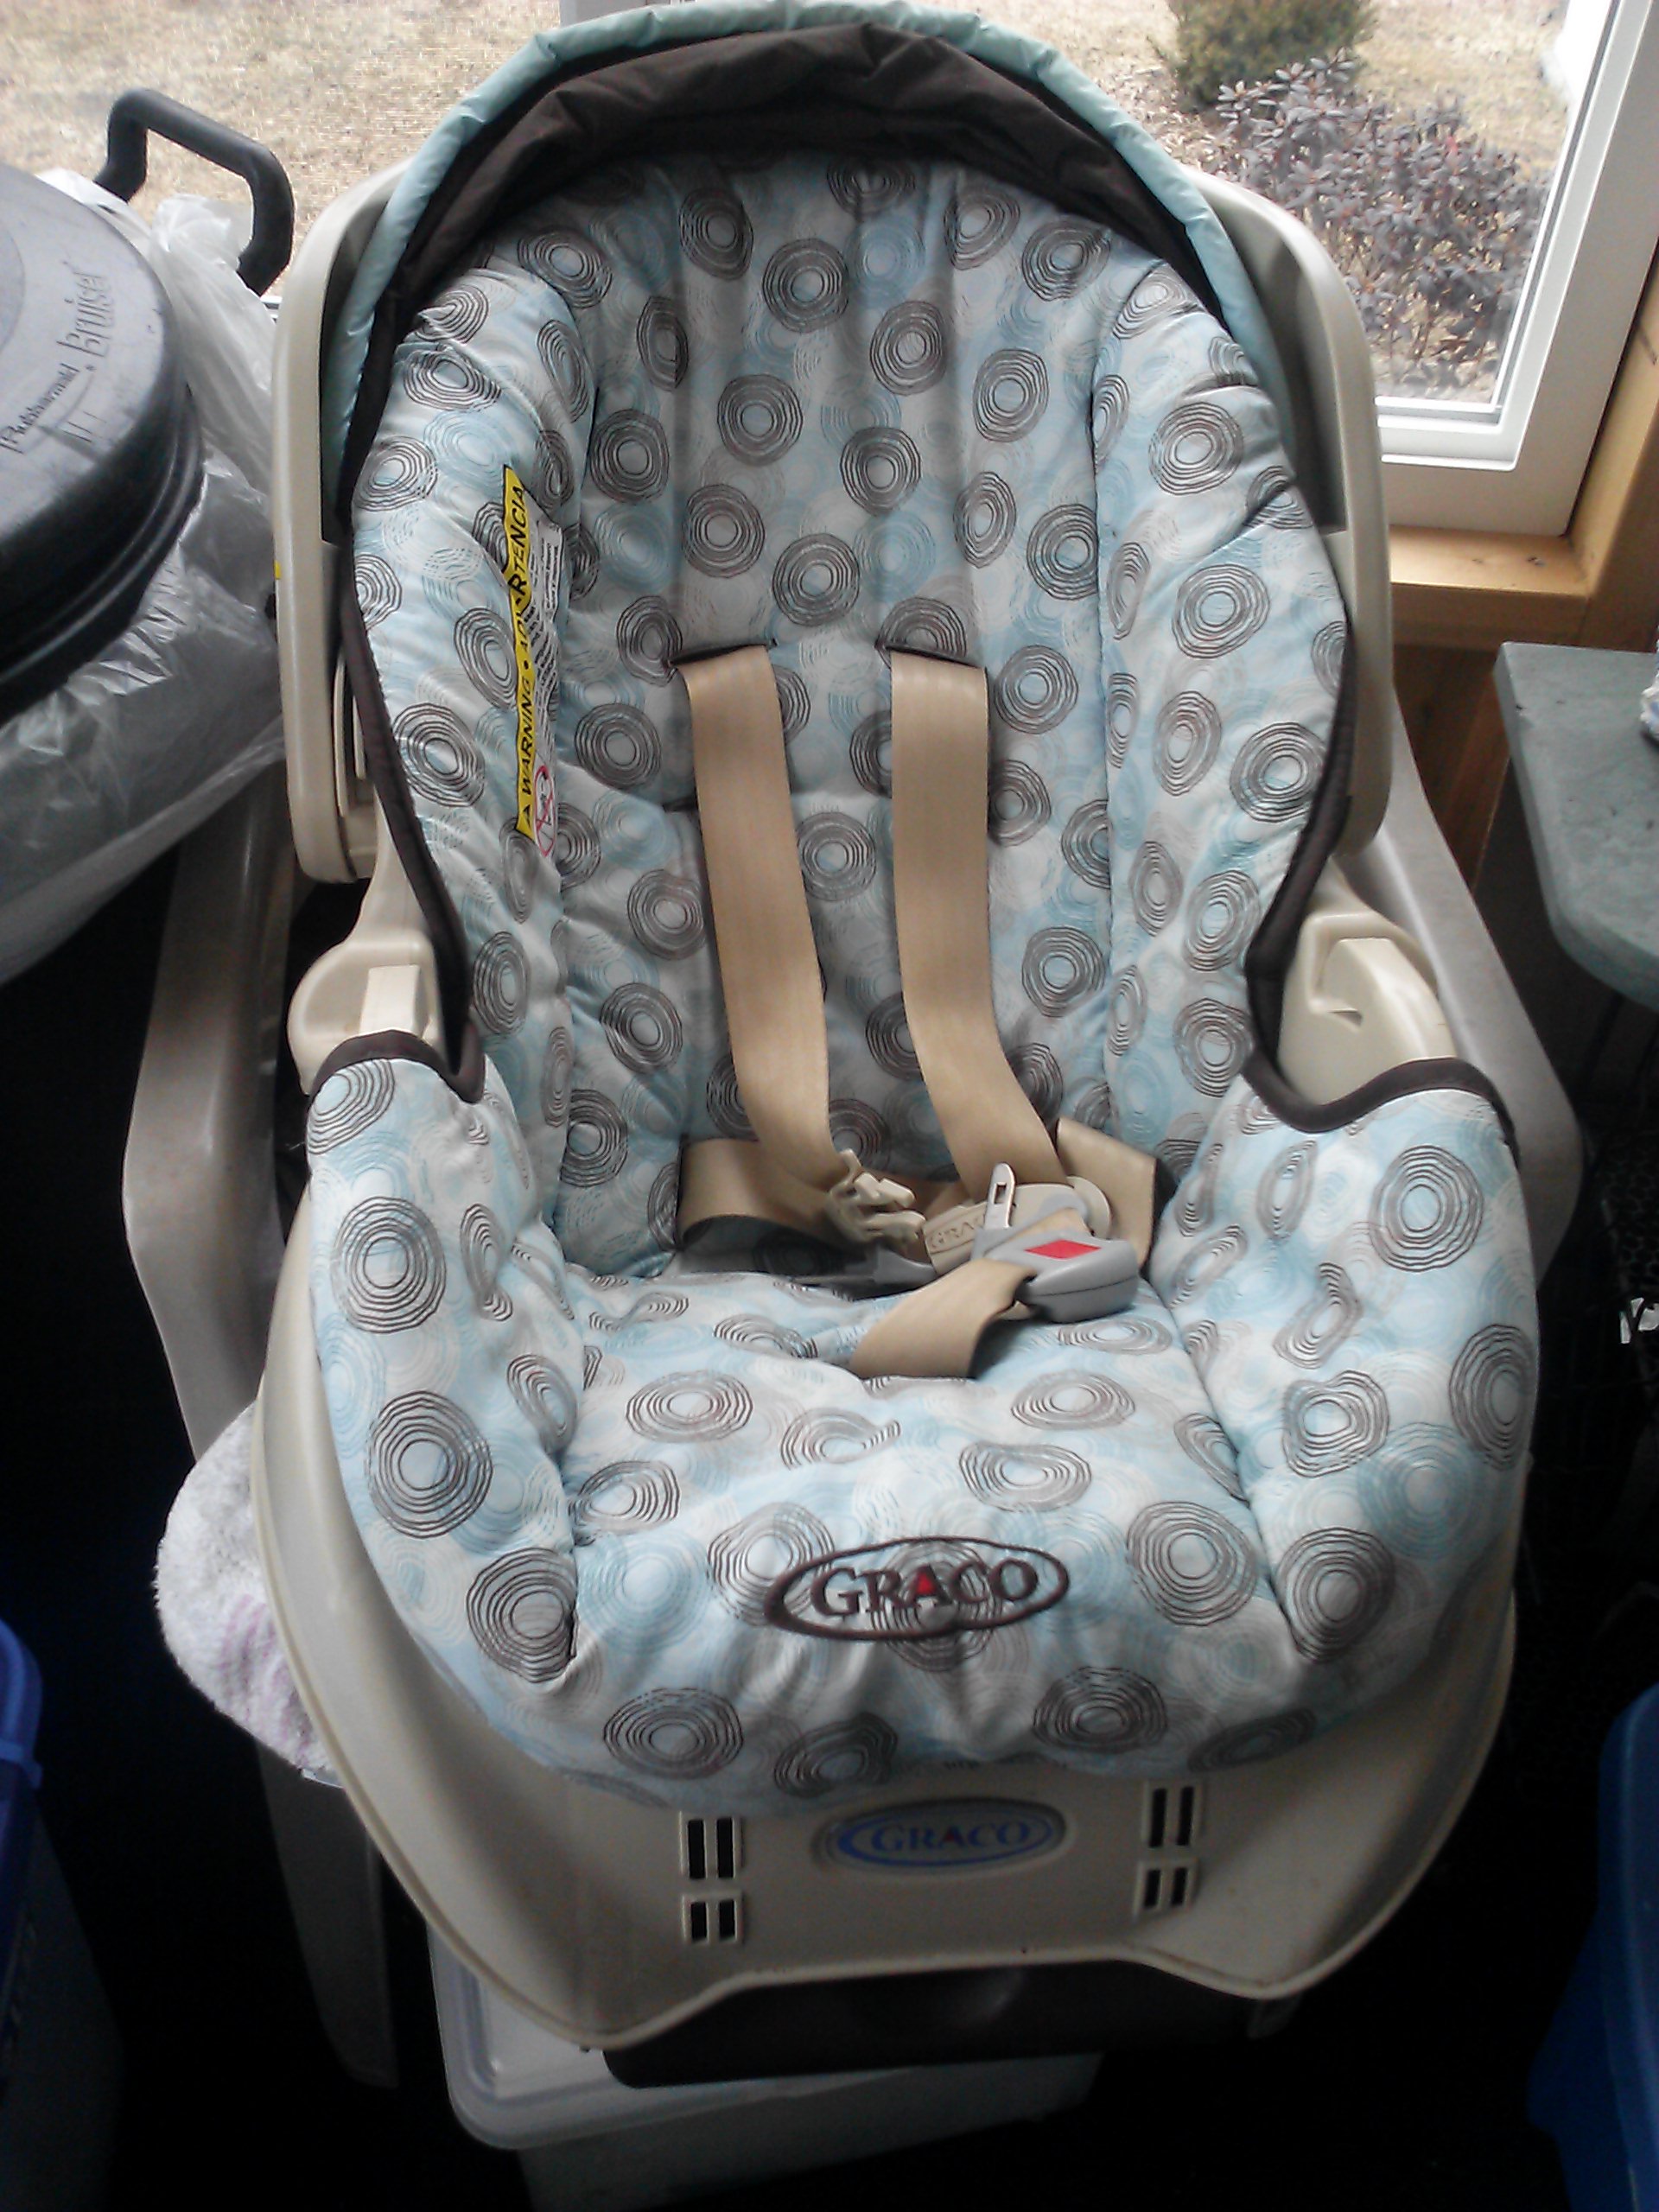 Infant Car Seat, with extra grandma base